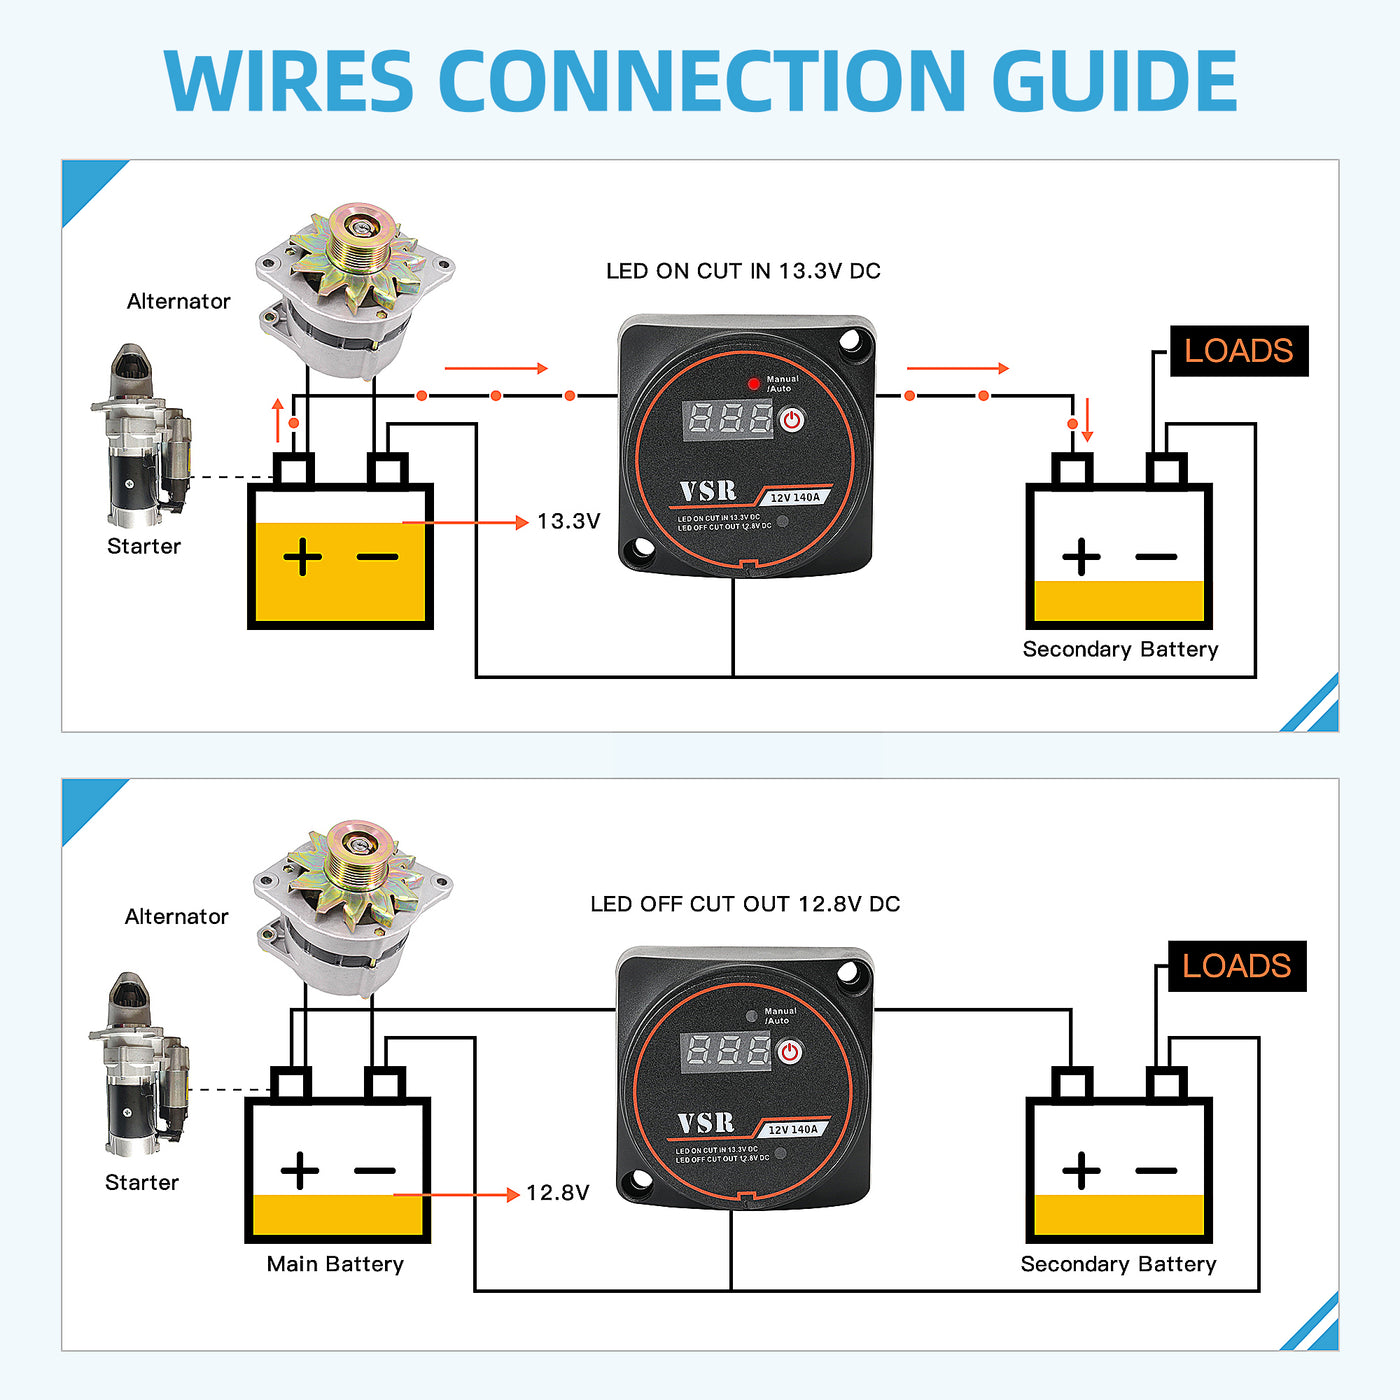 ASW-A401M-1 VSR Smart Dual Battery Isolator Wires Connection Guide